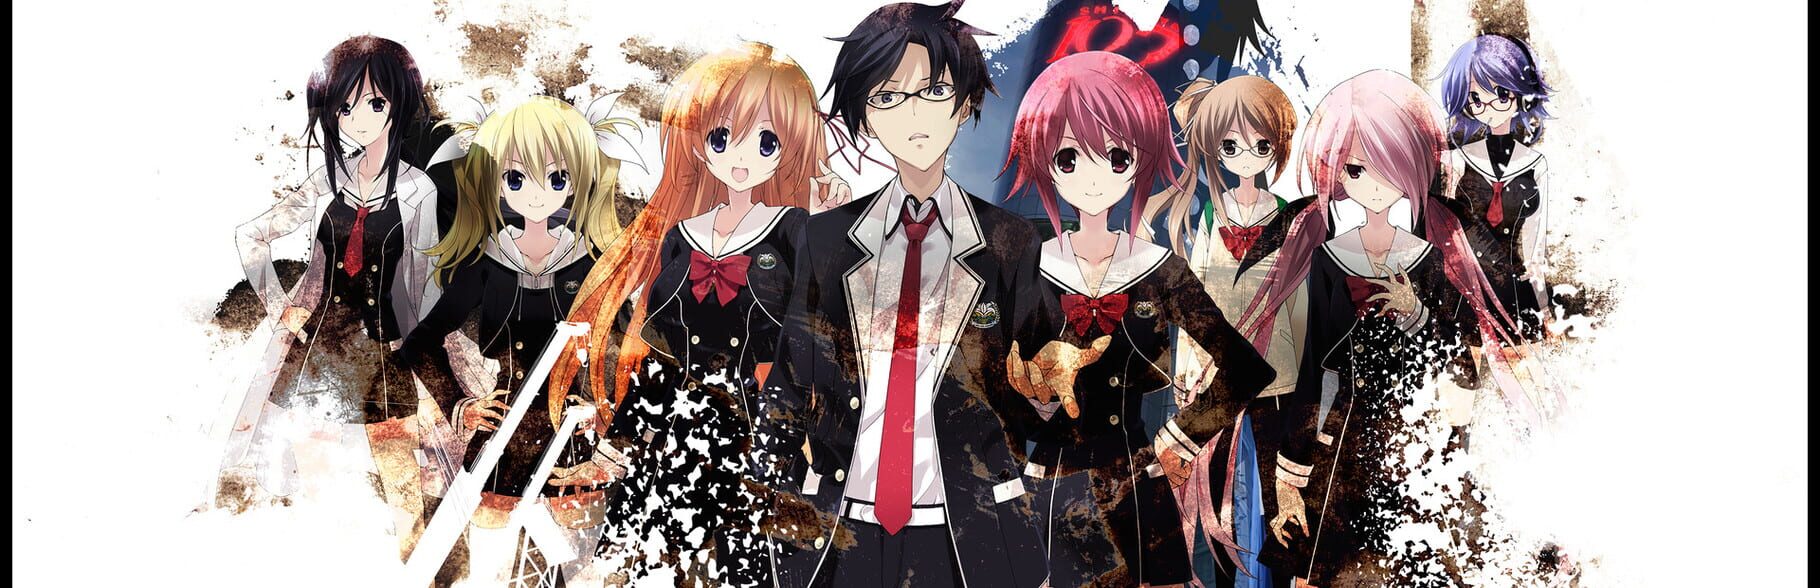 Artwork for Chaos;Child